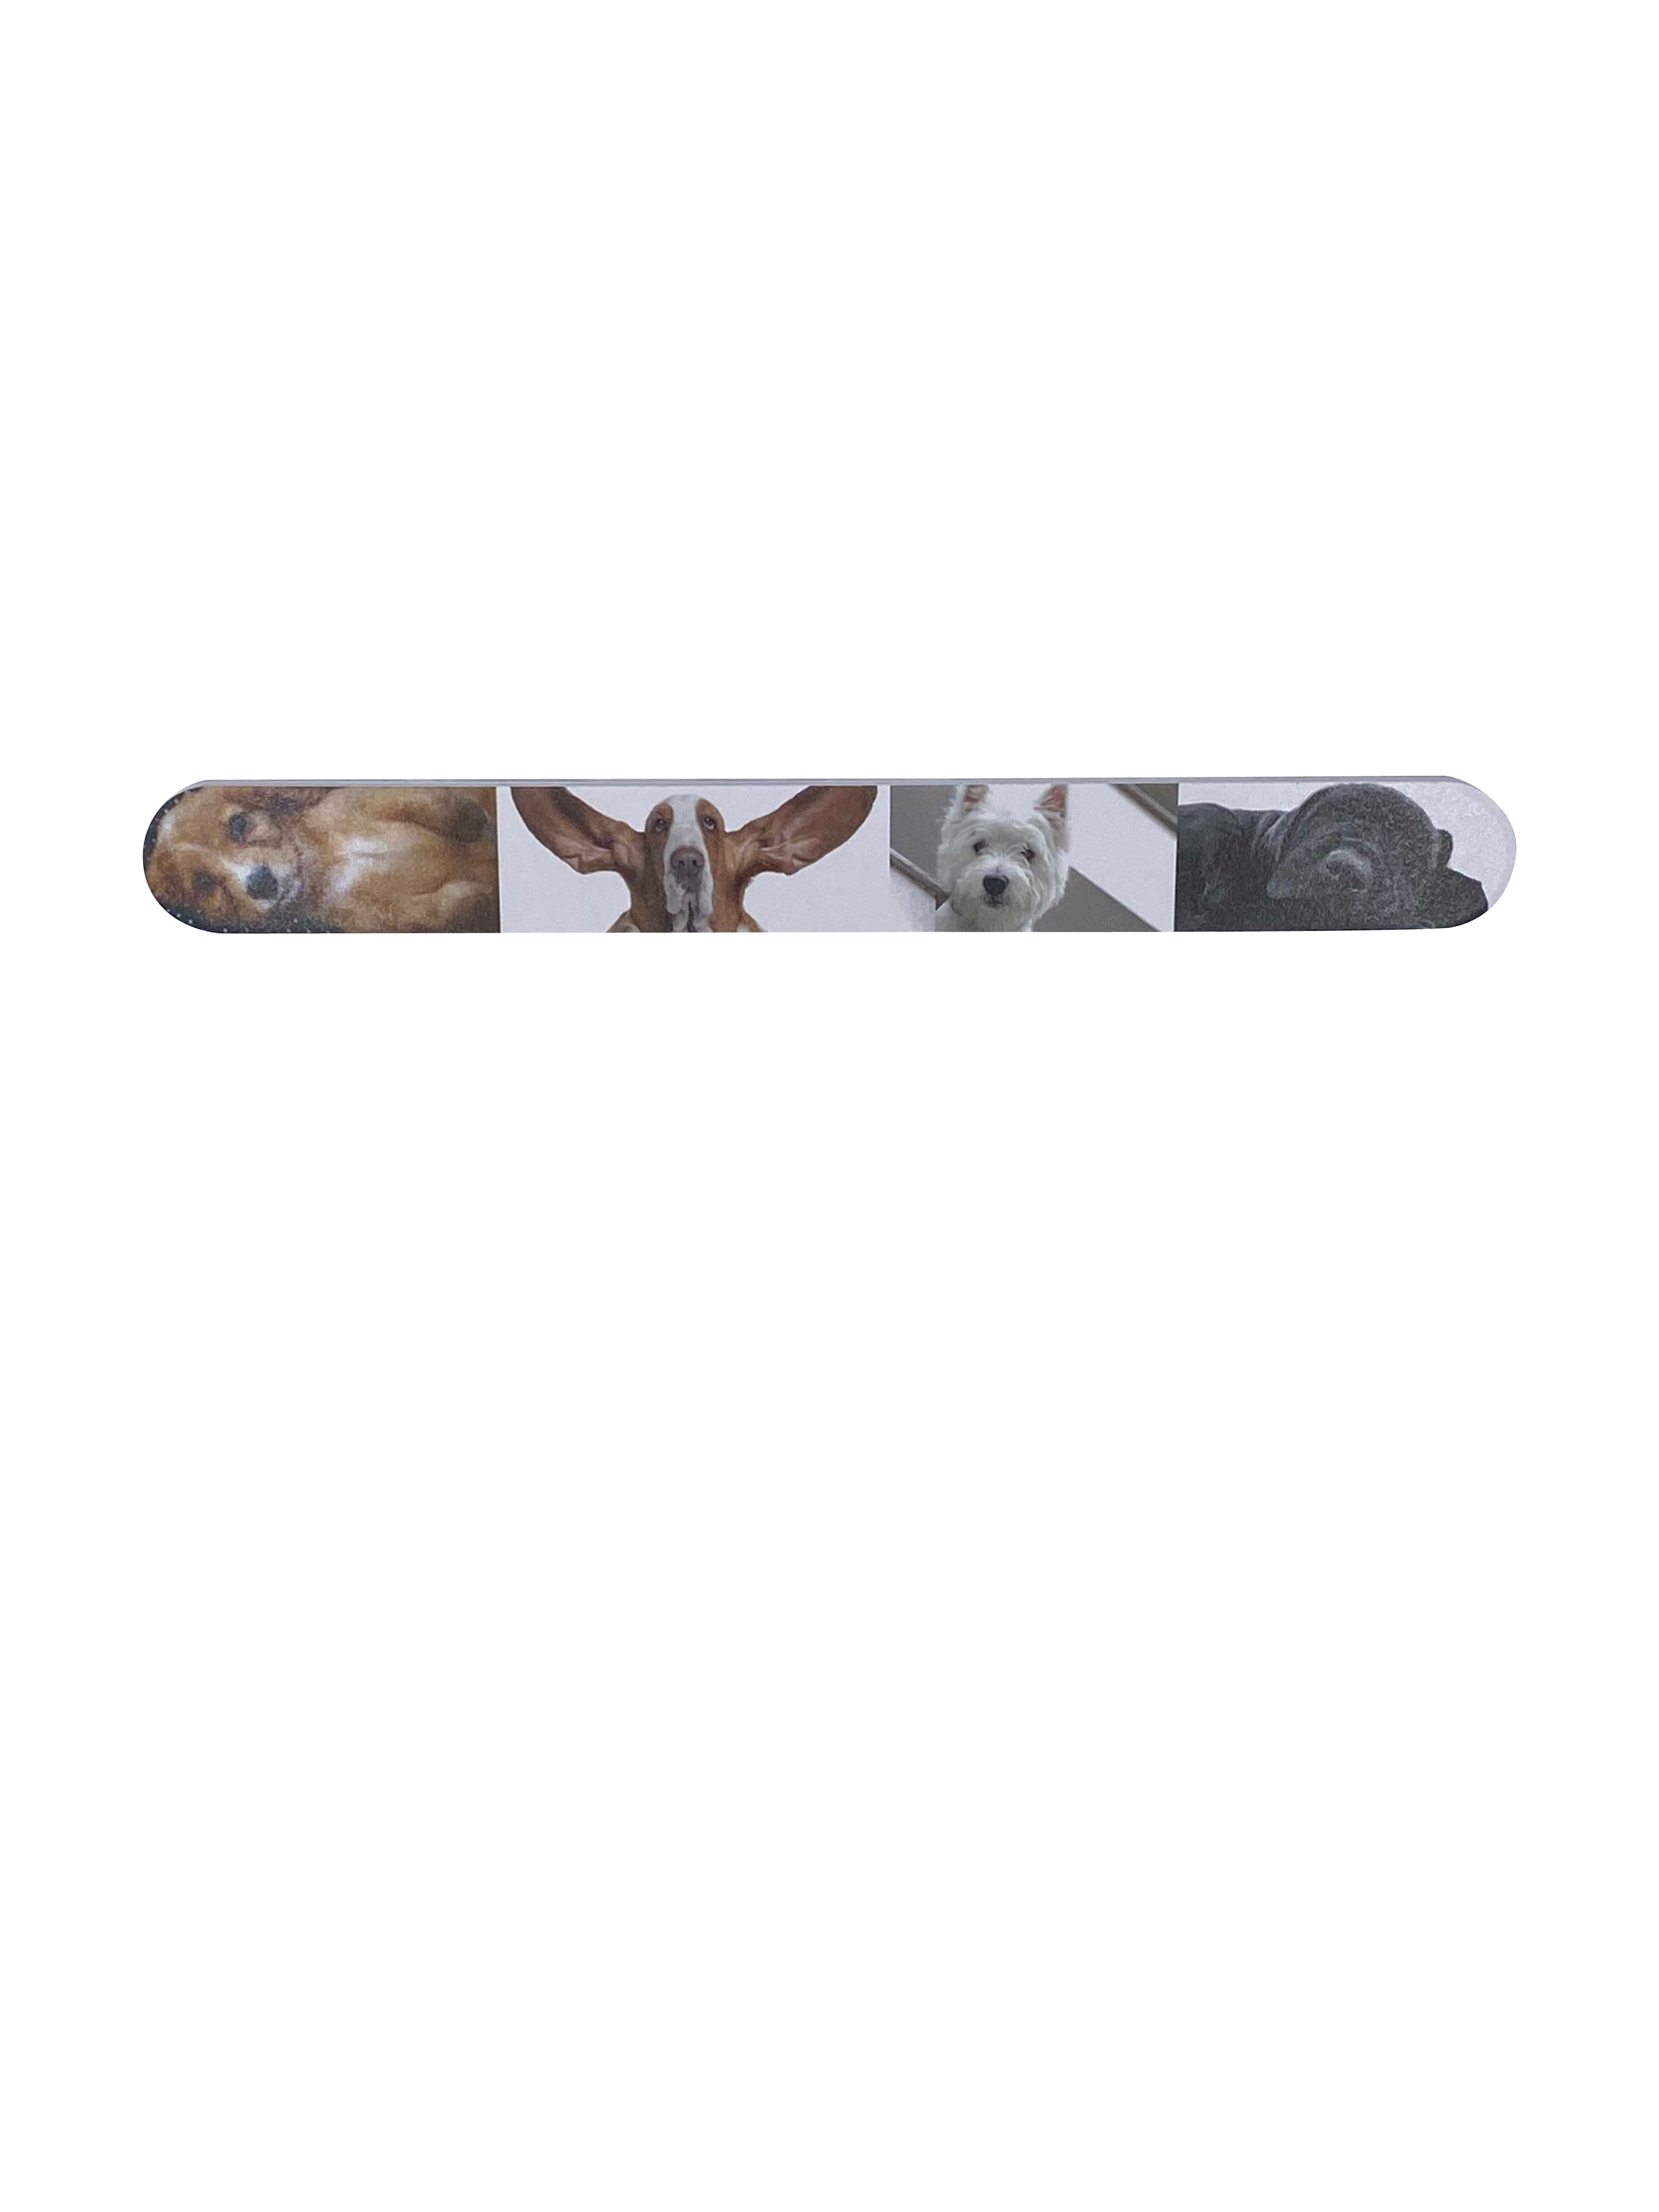 Nail File - For Dogs or Humans - 6 Pack Deals & Packages Warren London Dogs 1 File 